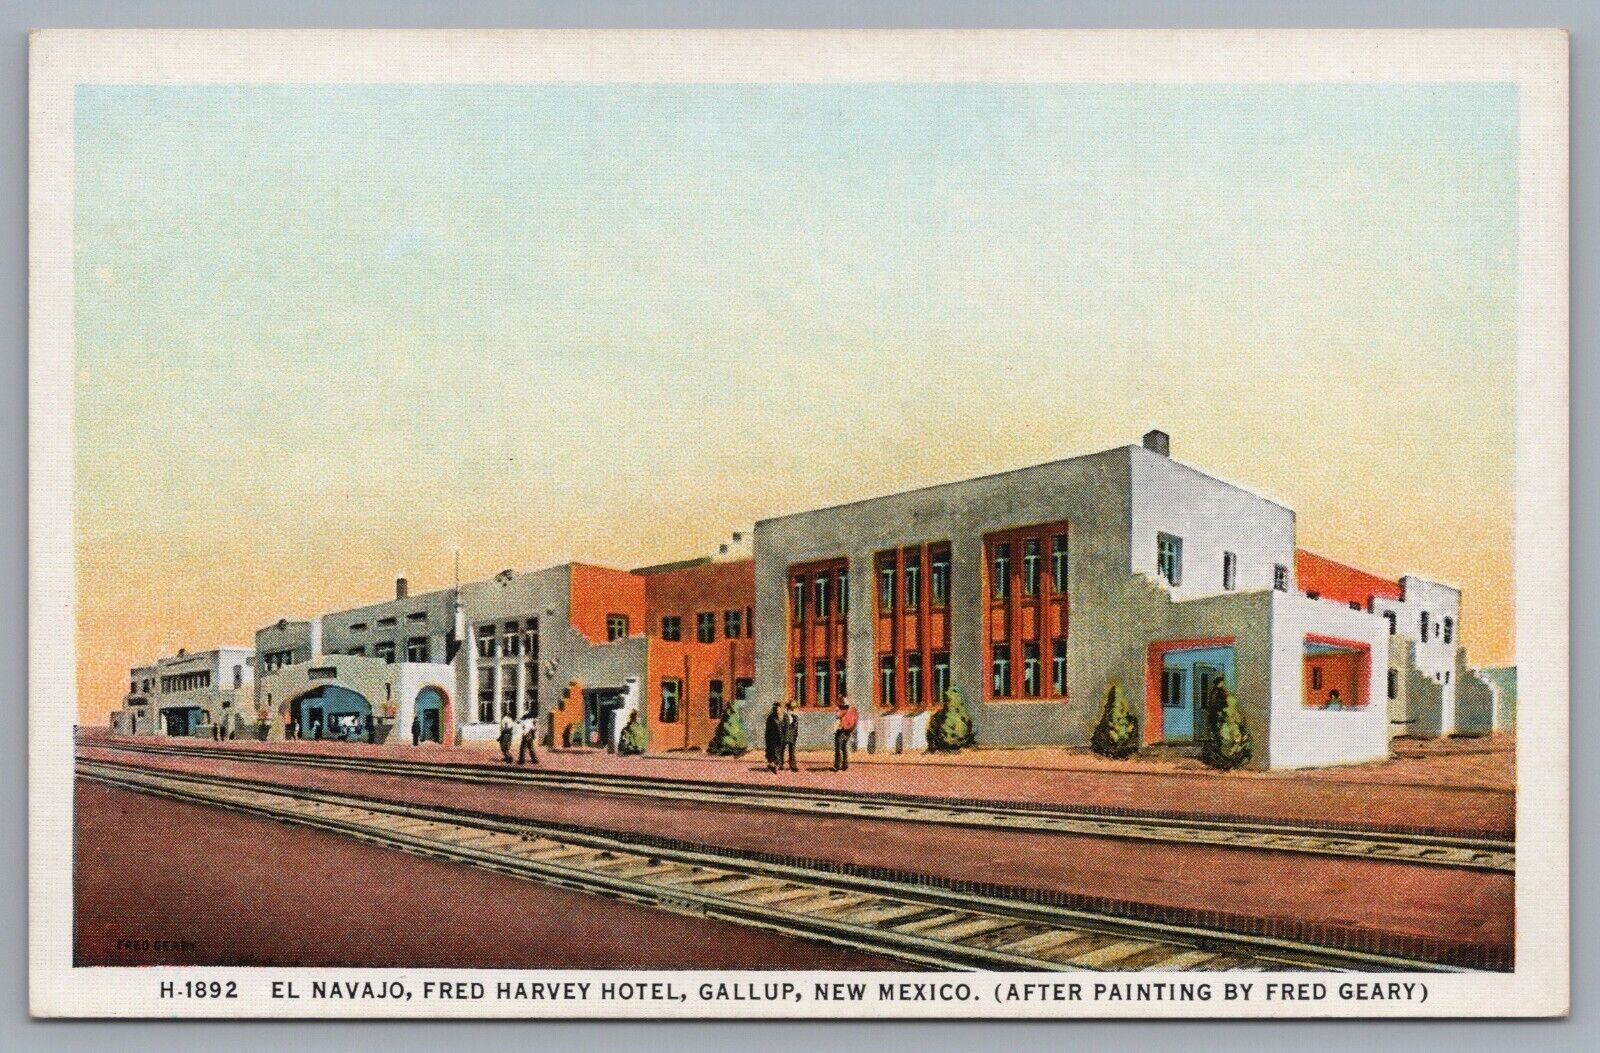 El Navajo Fred Harvey Hotel - Gallup New Mexico Fred Geary Painting Postcard